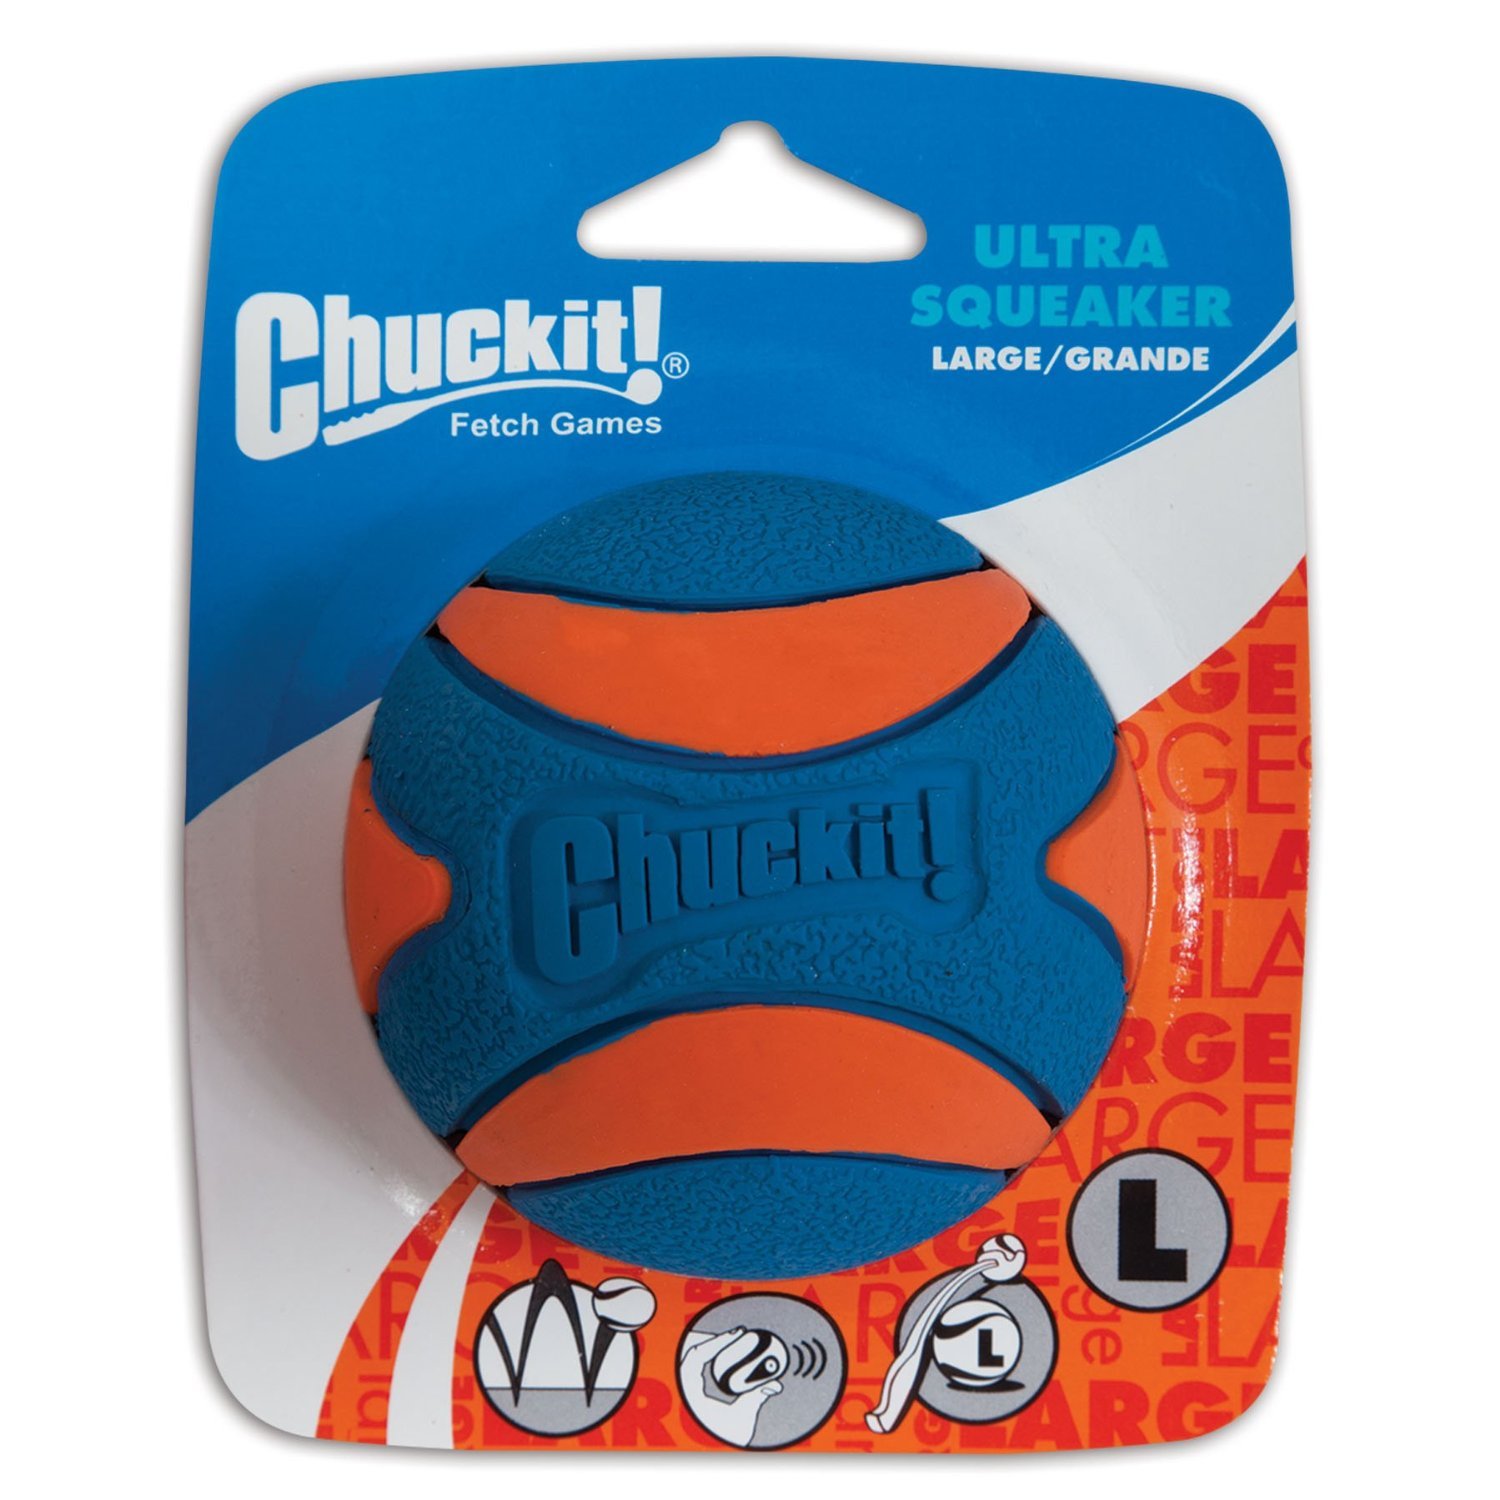 Chuck It (3 Pack) Ultra Squeaker Ball, Large